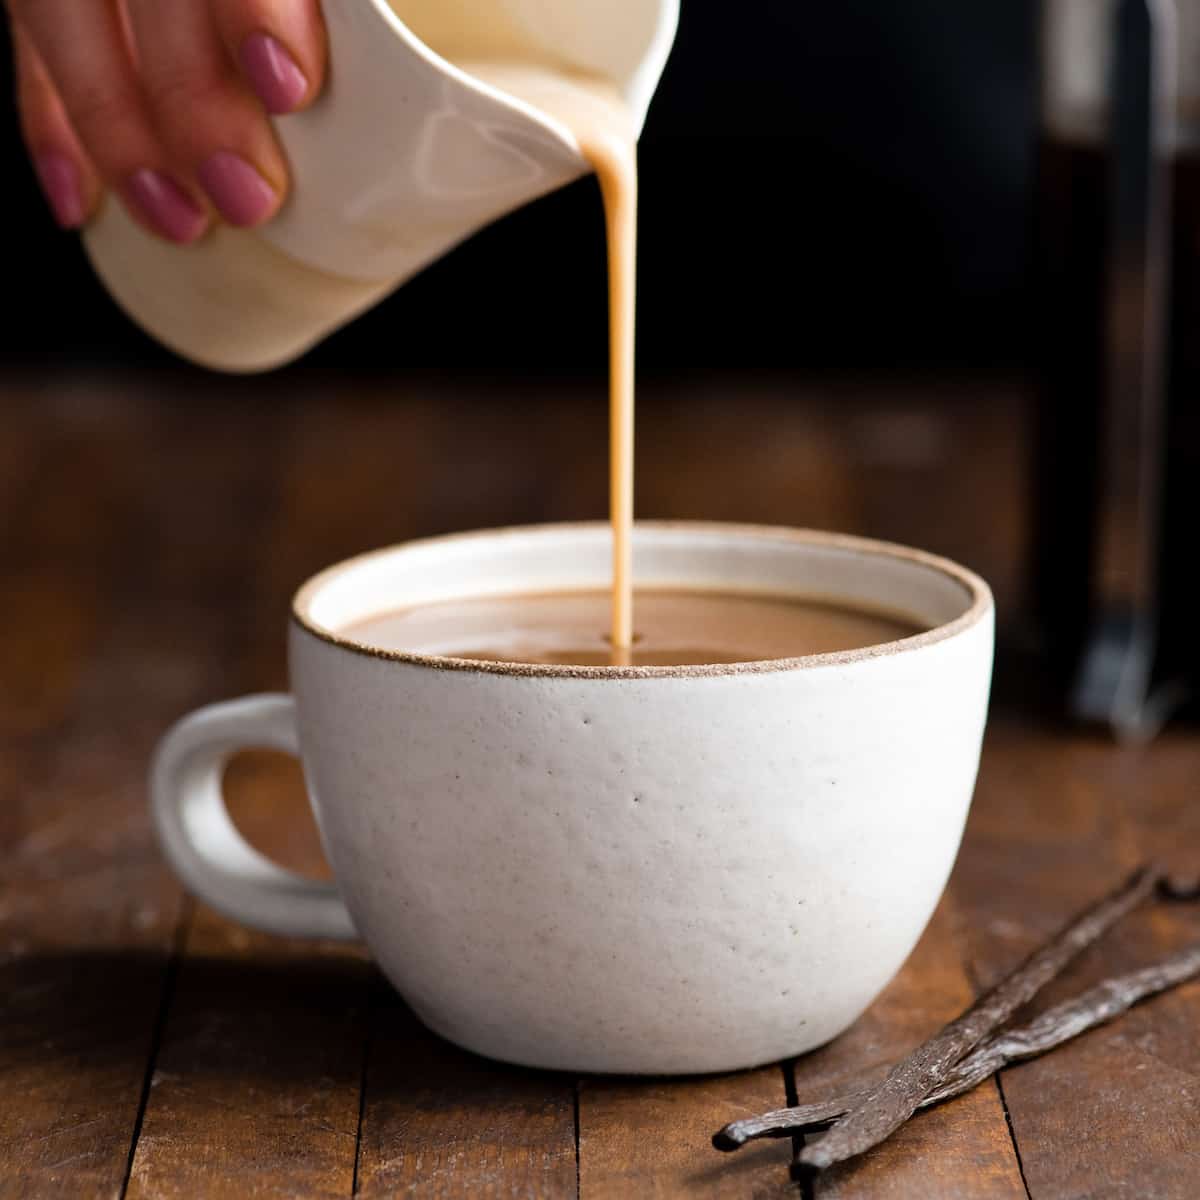 How to Make Coffee Creamer: A Simple and Delicious Homemade Recipe